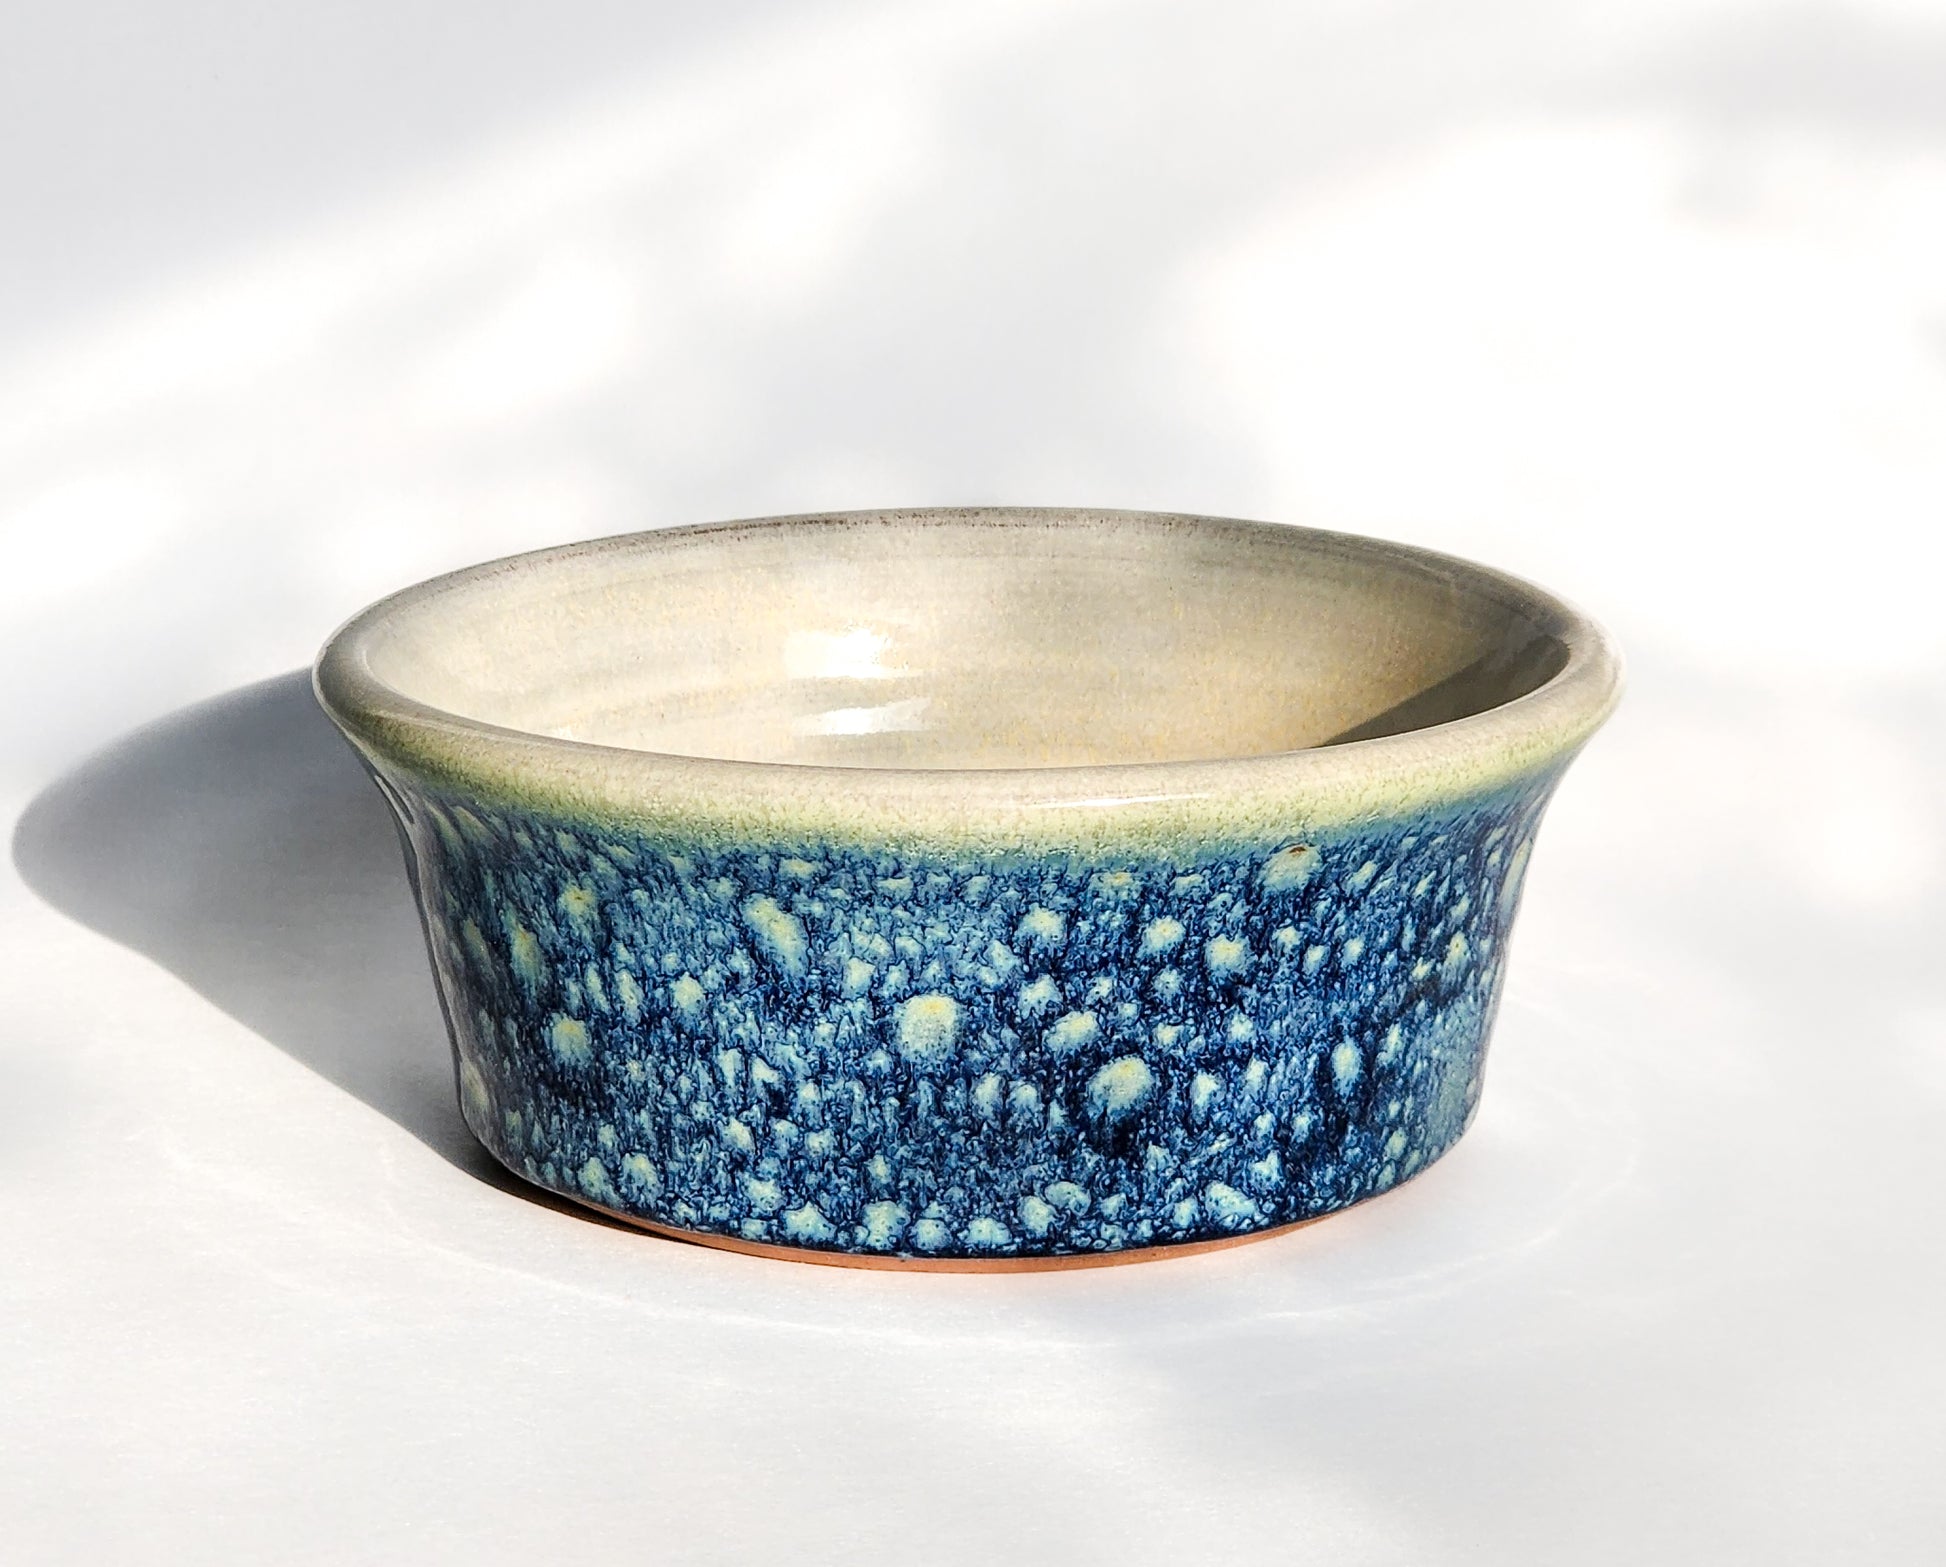 Image: Clinton Pottery's Handmade 1 Cup Flat Bottom Bowl in Starry Night – Inspired by the ethereal beauty of Van Gogh's Starry Night, this machine washable bowl seamlessly merges artistry with practicality. The enchanting Starry Night color evokes the magic of the iconic masterpiece, reminiscent of Van Gogh's swirling stars and cosmic wonder. Perfect for serving snacks or adding a touch of celestial elegance to your culinary space.